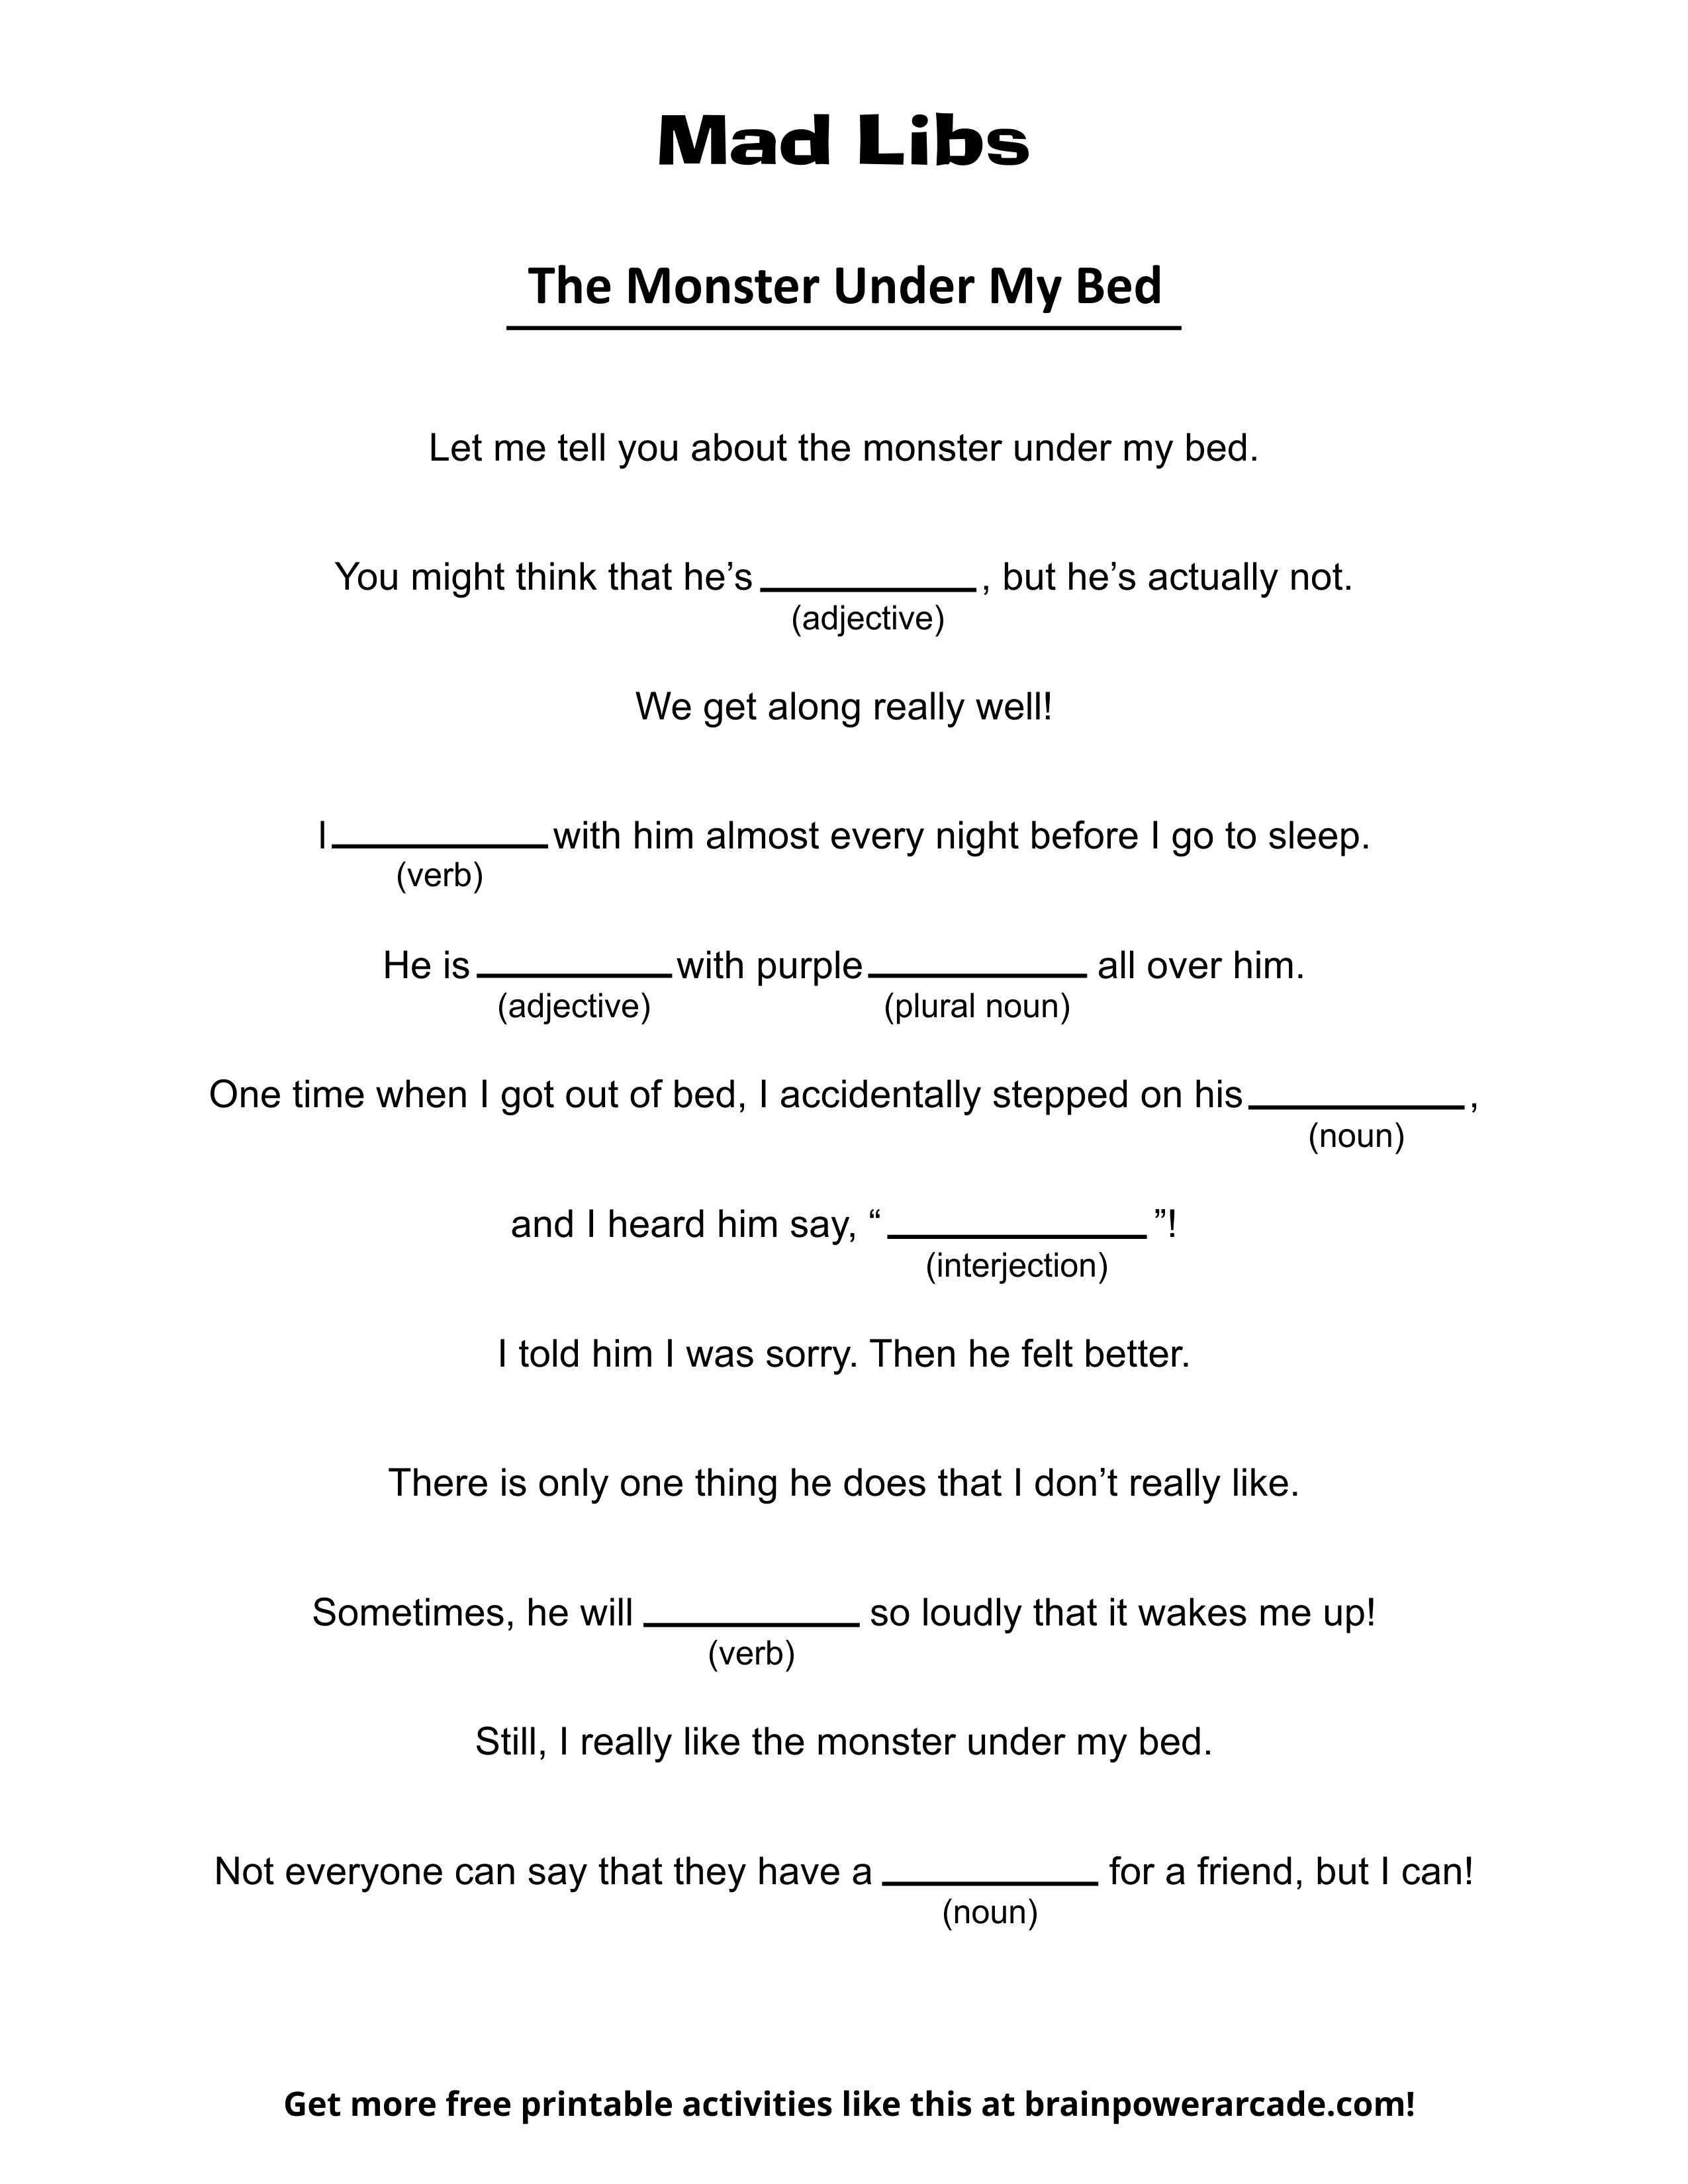 Complete the Mad Libs Story